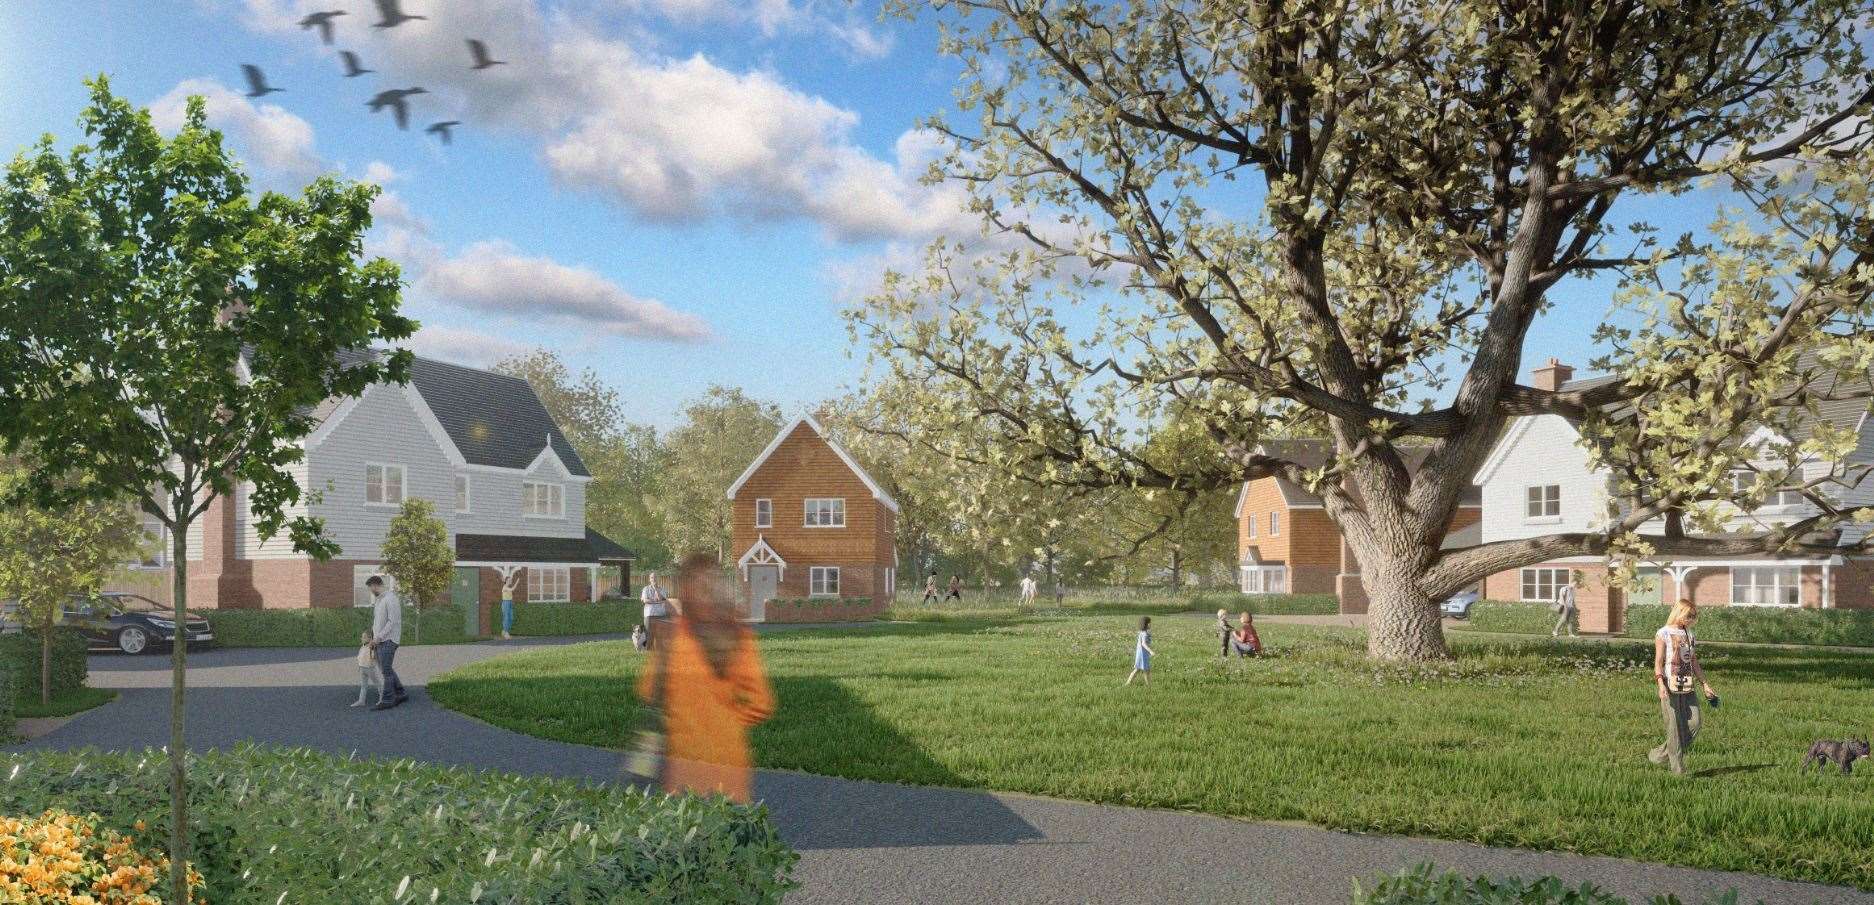 76 homes on land at Fosse Bank independent school could be approved at a Tonbridge and Malling planning meeting next Thursday